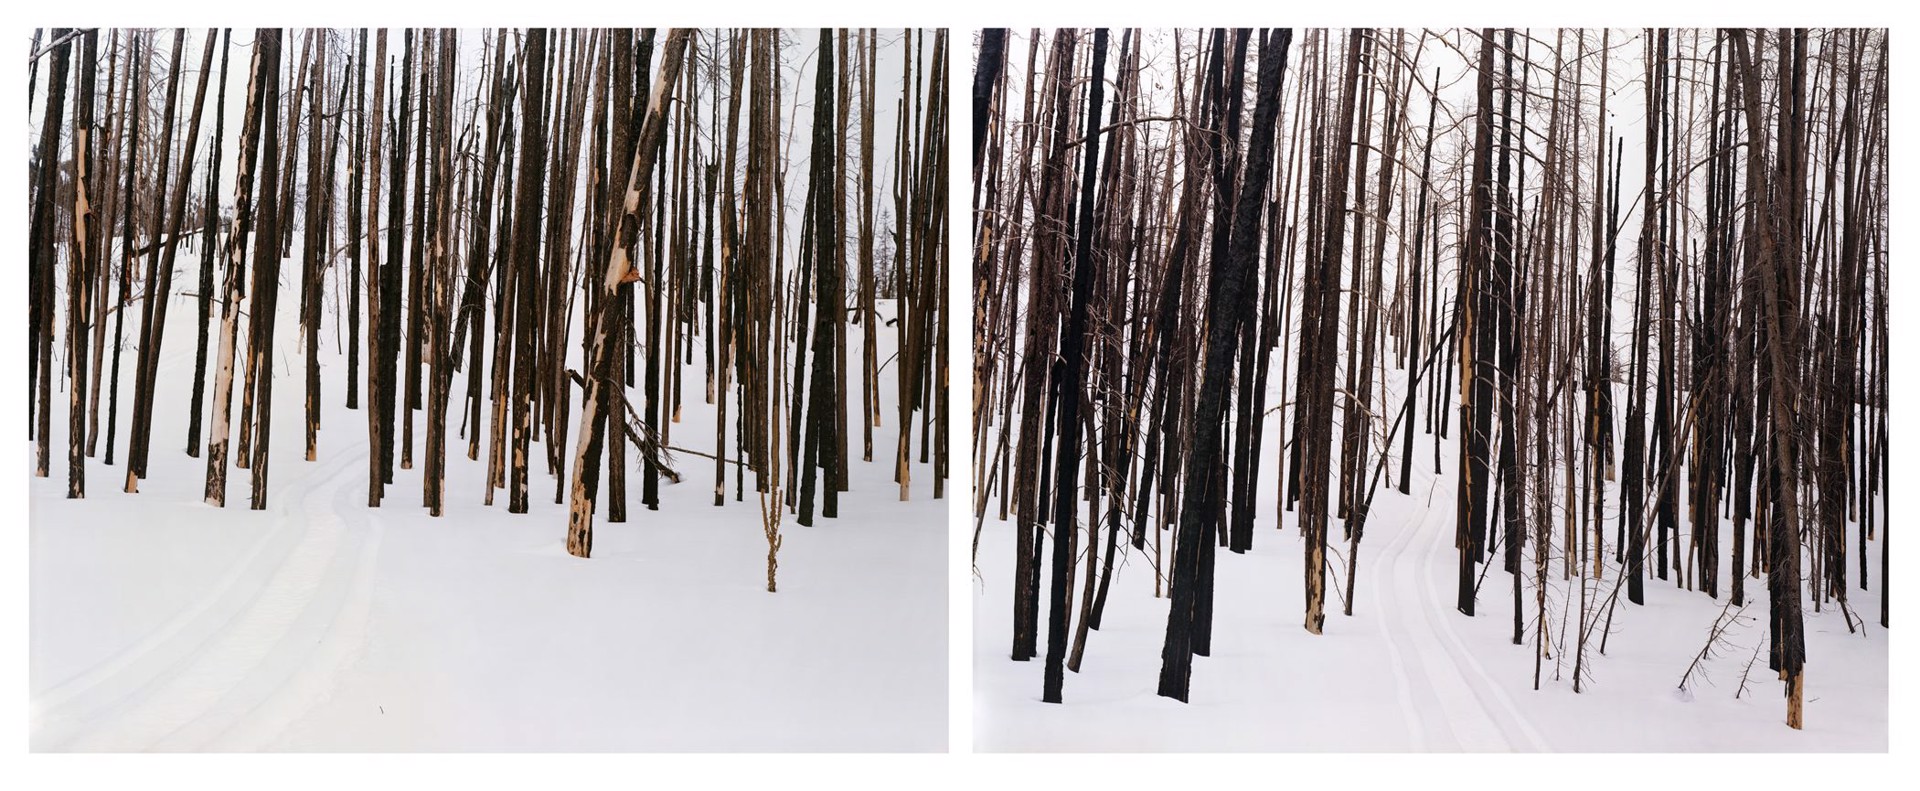 Midwinter, Two Sides of One Hill Diptych 4/5 by Laura McPhee